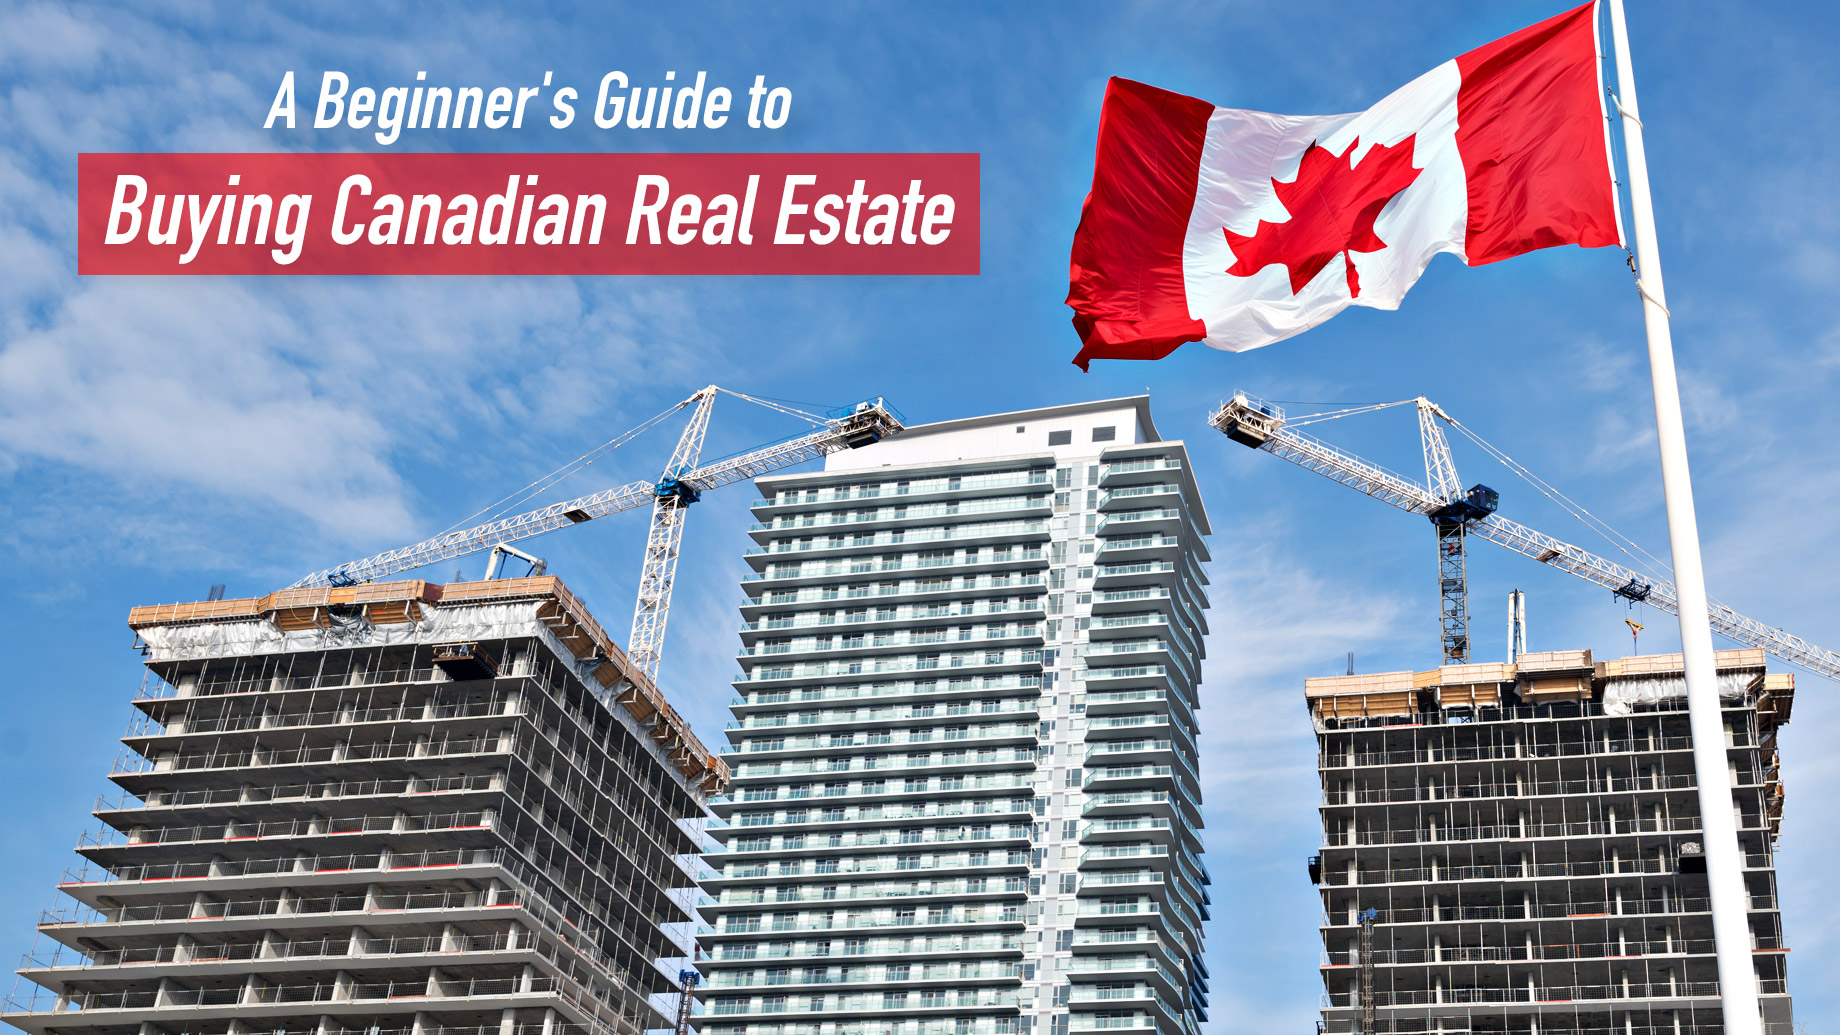 A Beginner's Guide to Buying Canadian Real Estate